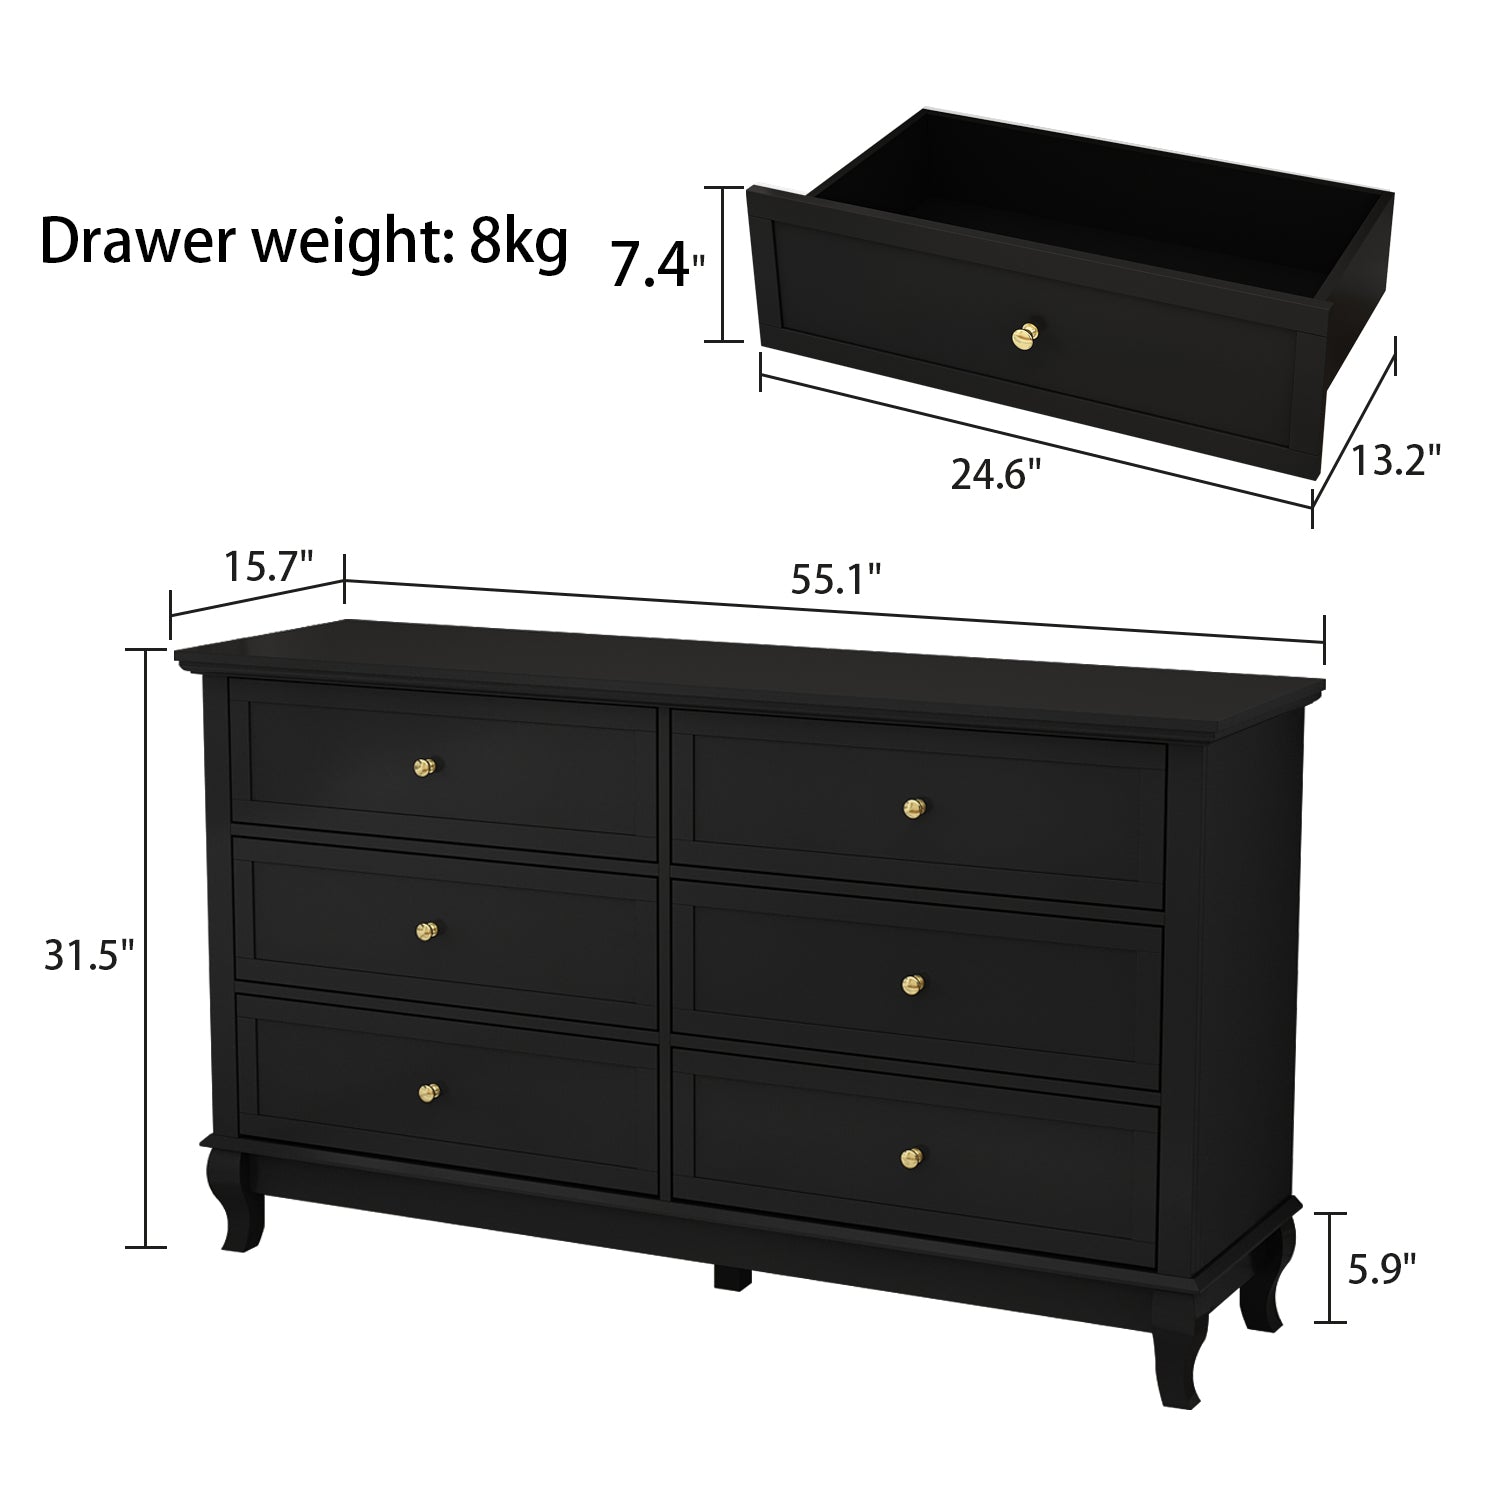 6-Drawer Dresser for Bedroom Display Wood Storage Chest of 6 Drawers Cabinet